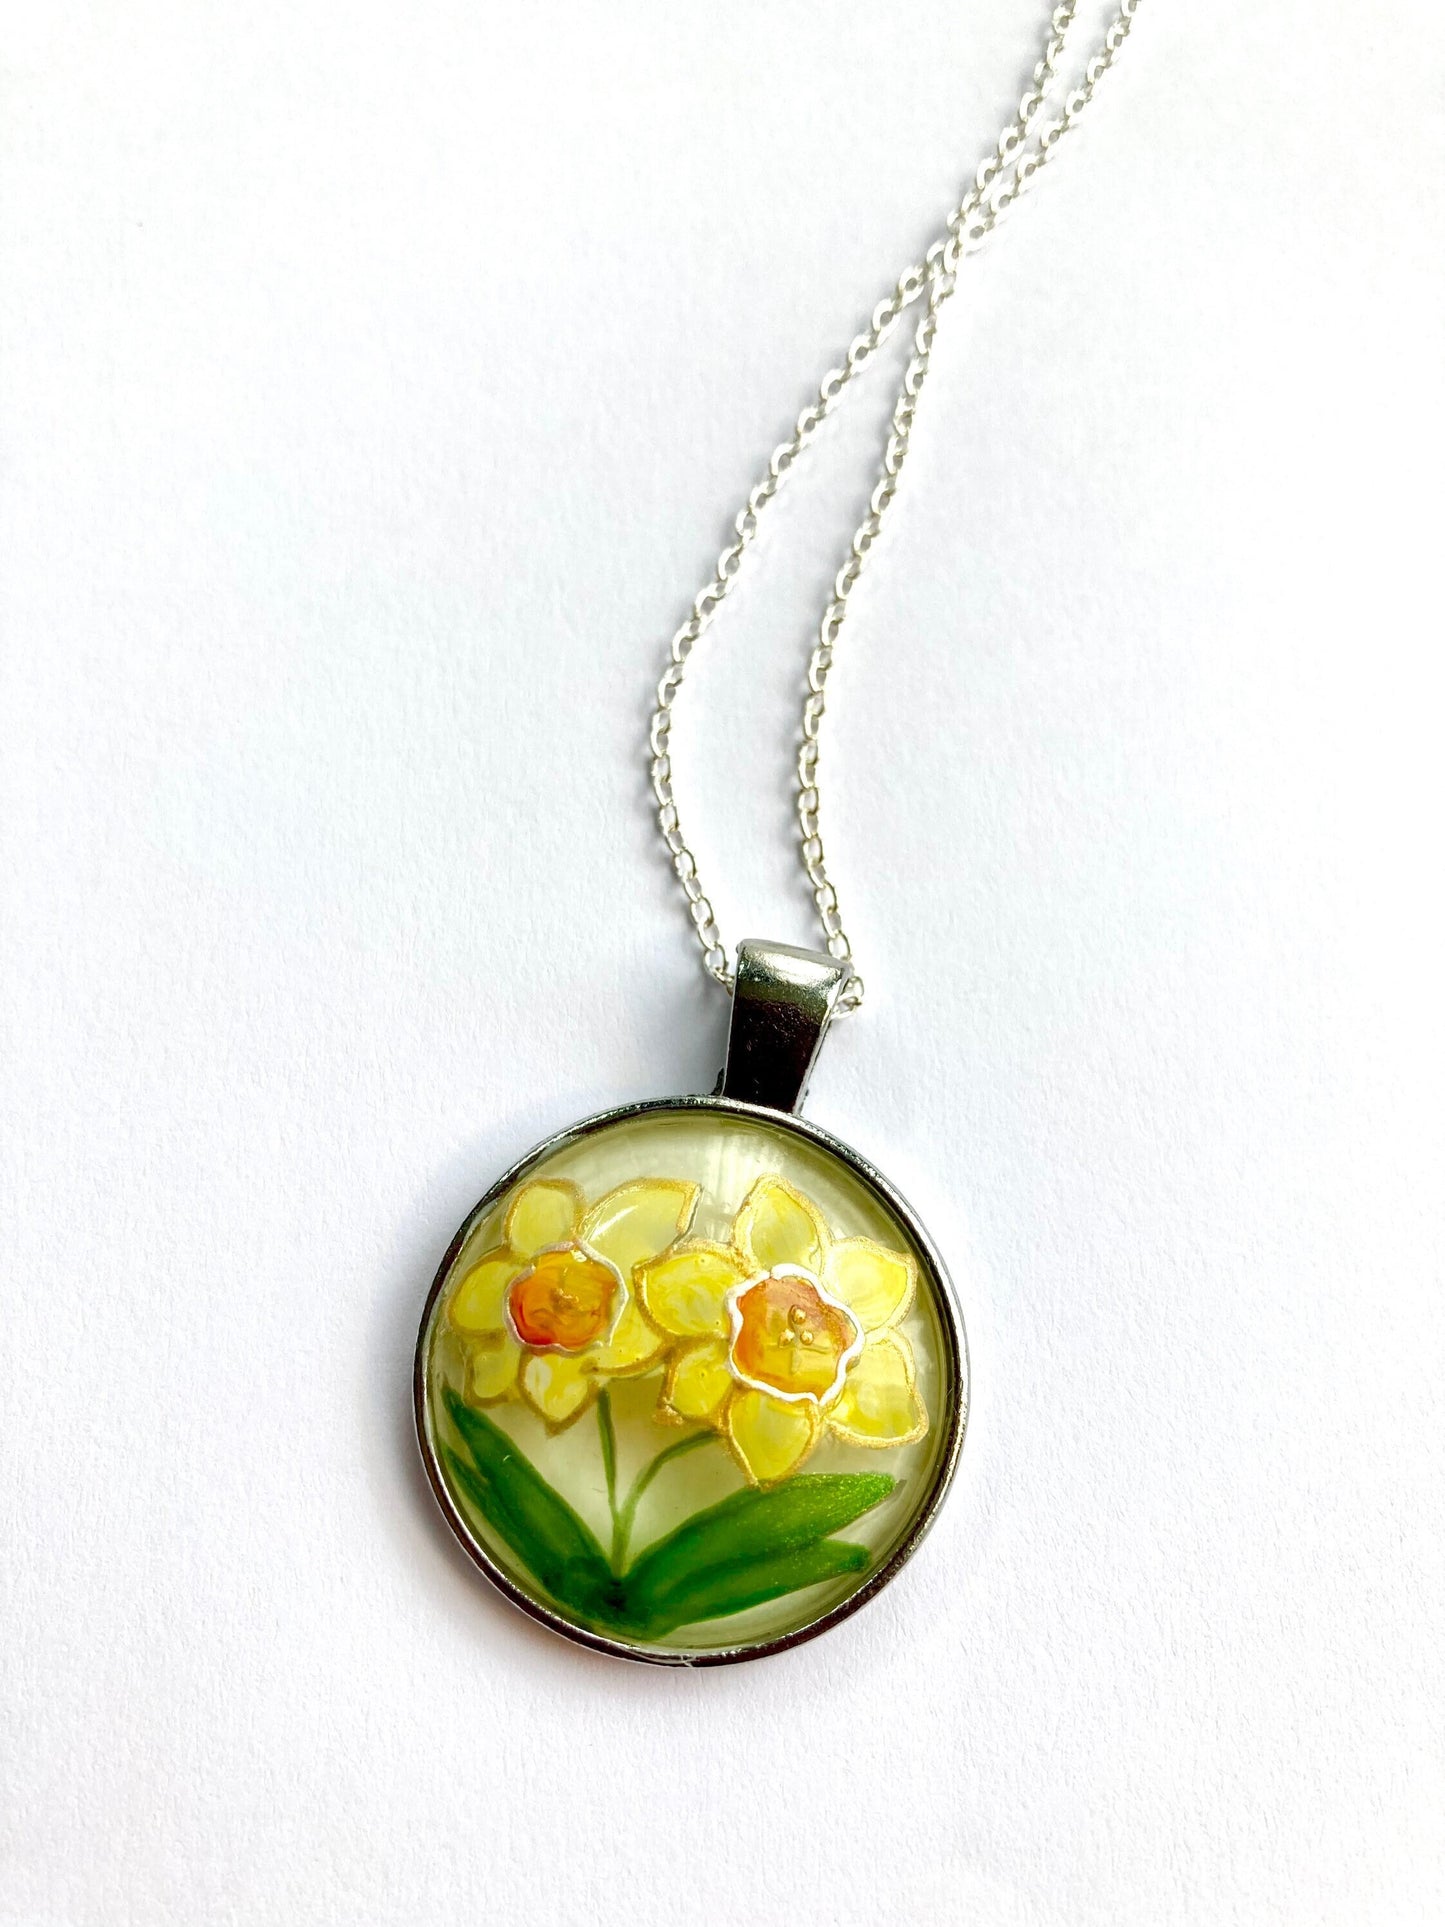 Daffodil design hand painted glass pendant necklace